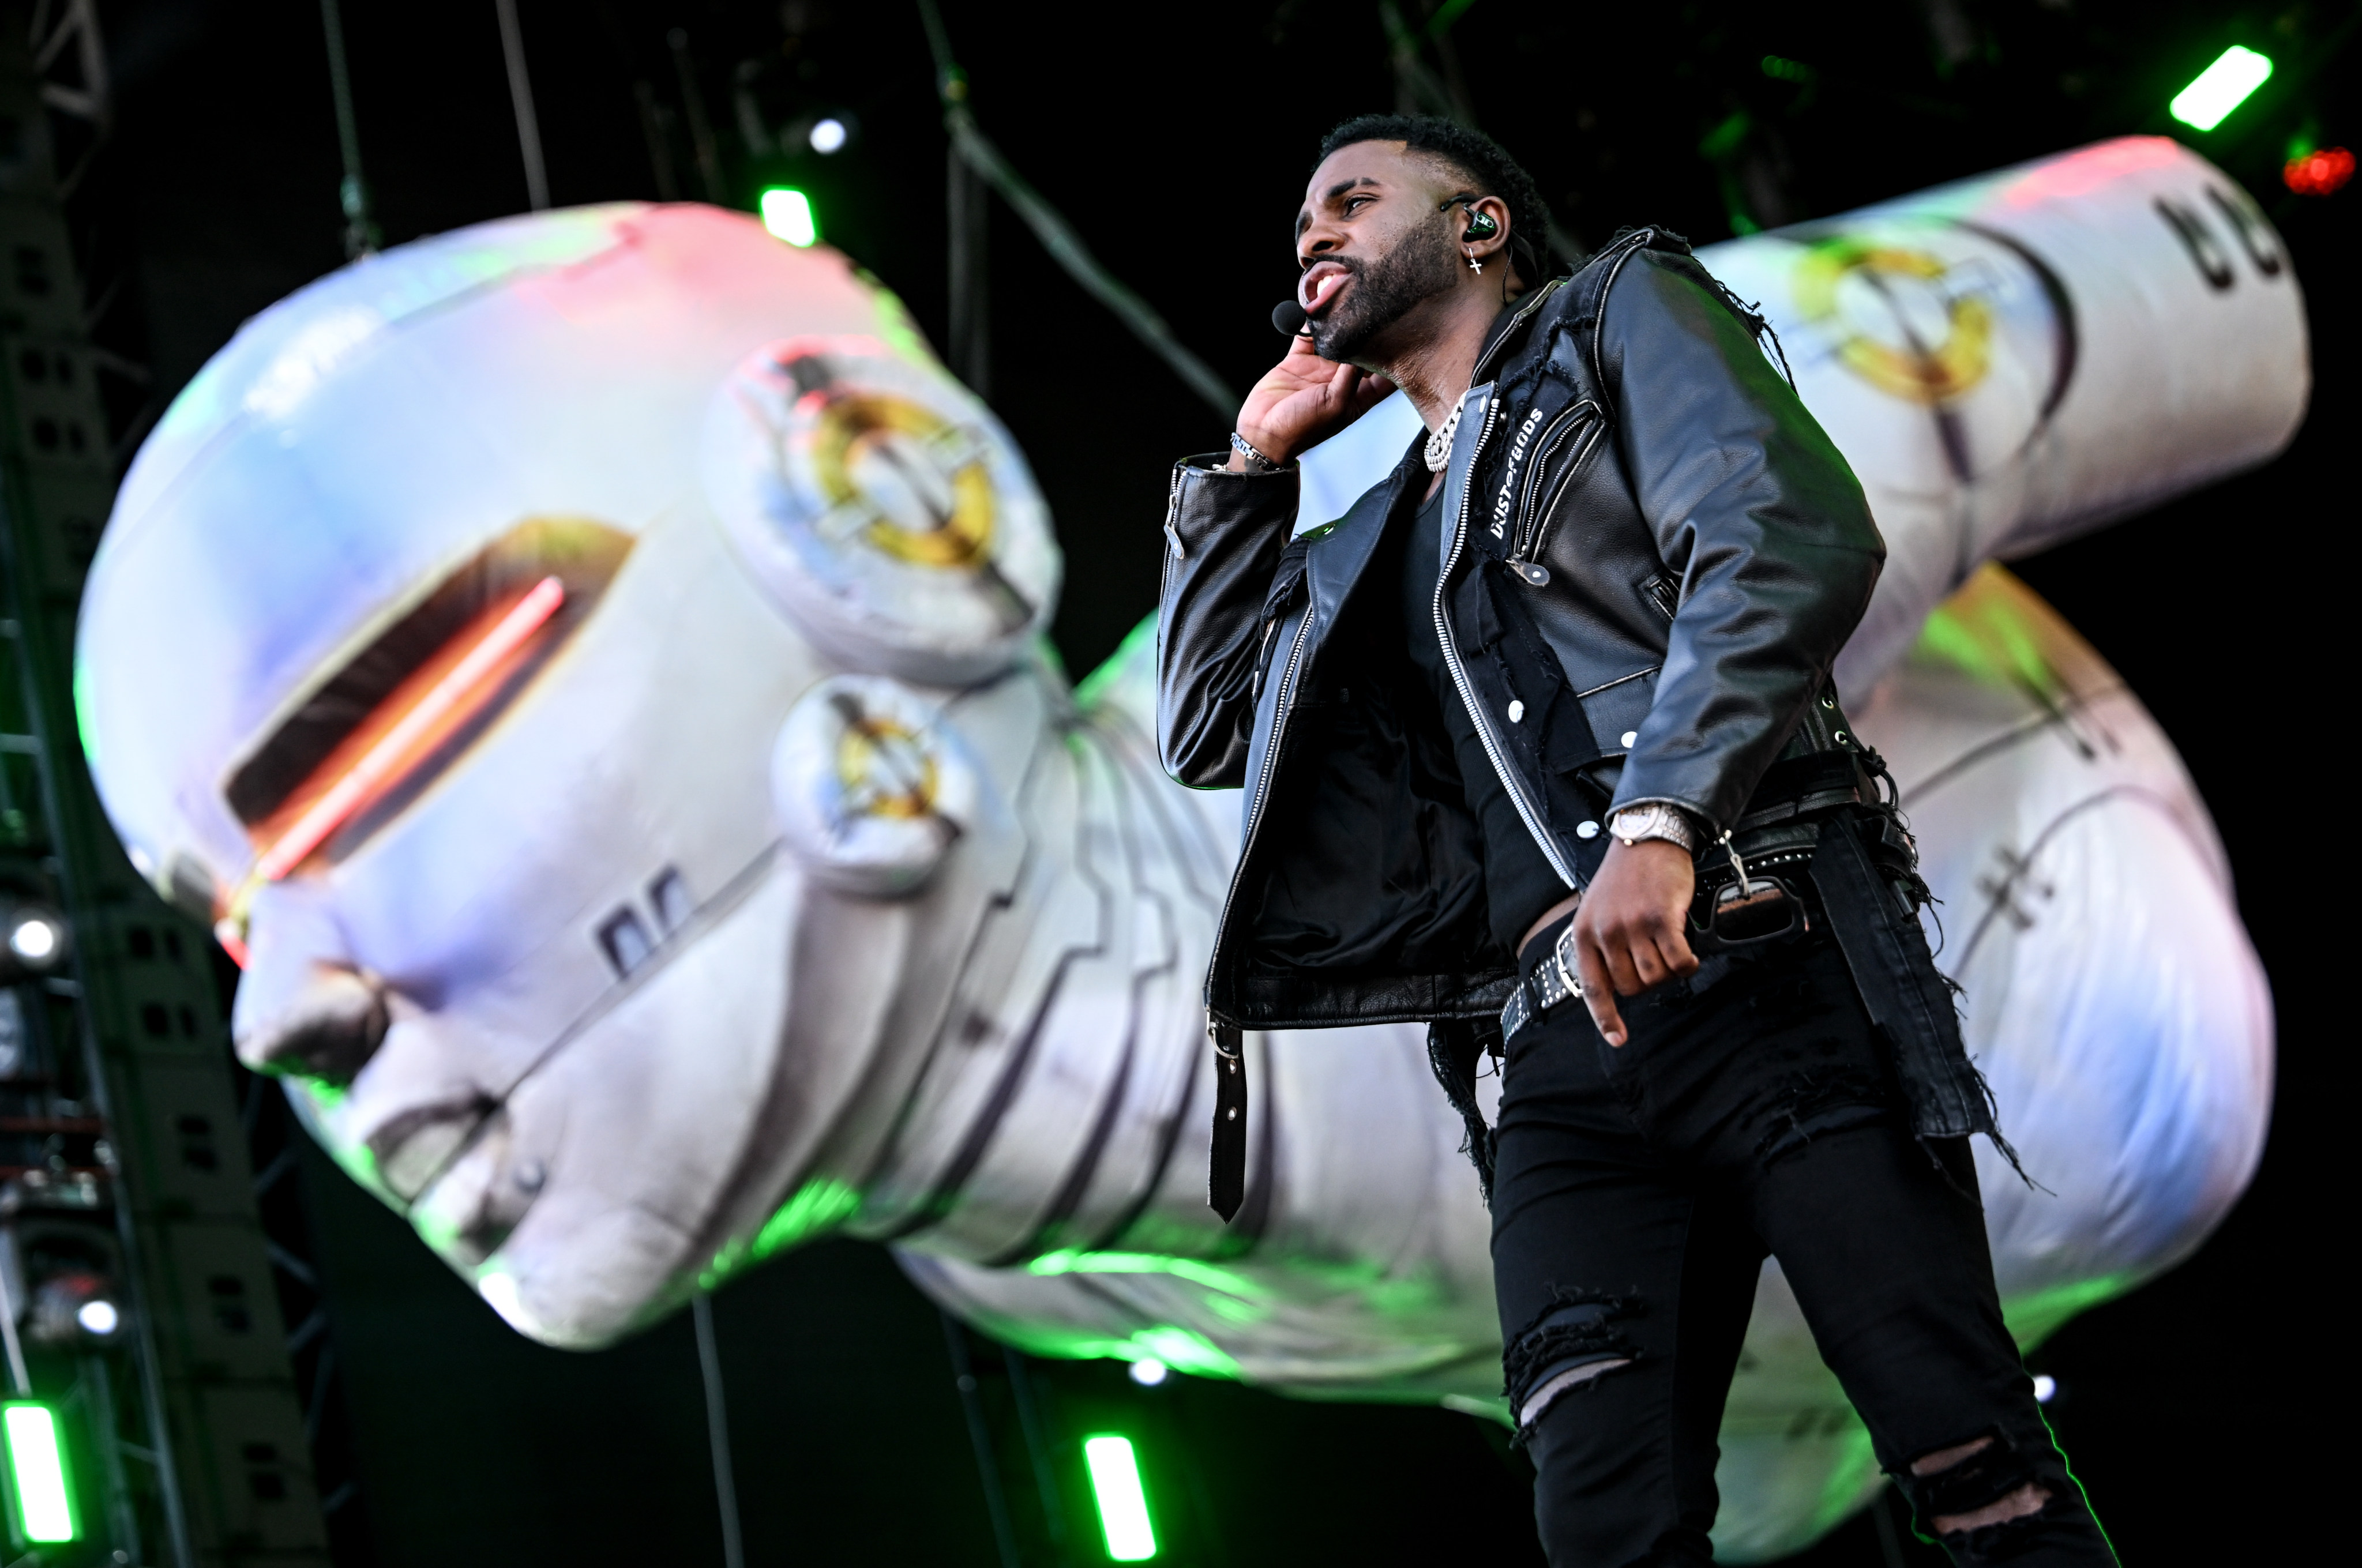 US singer Jason Derulo performs at the Lollapalooza Festival in Berlin on September 10. Photo: dpa